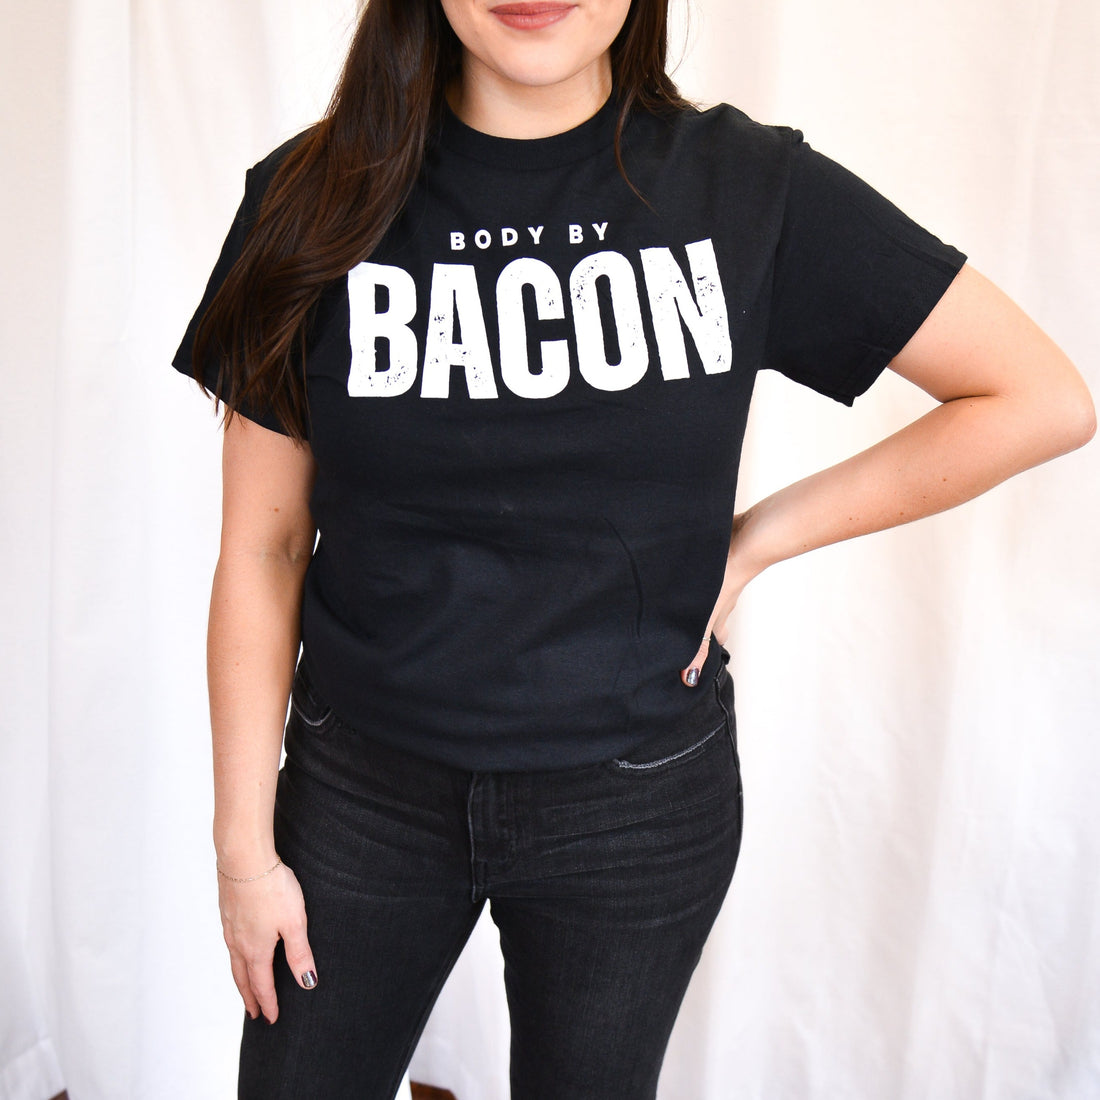 Body By Bacon T-Shirt - ADULT UNISEX - Black